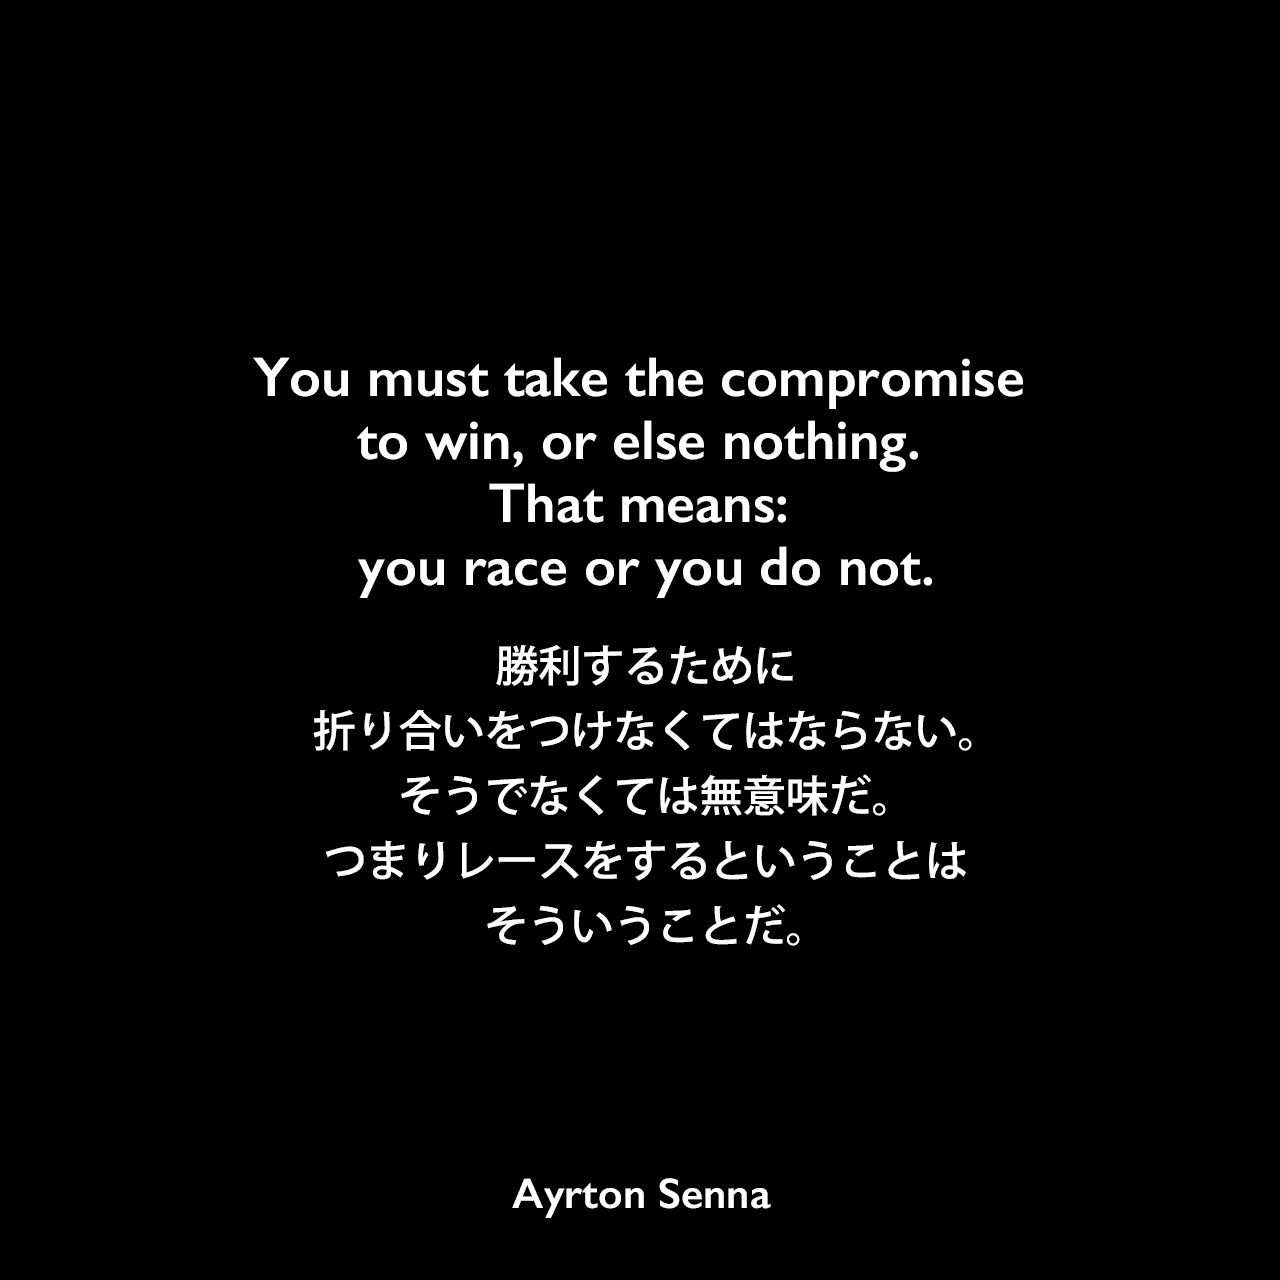 You must take the compromise to win, or else nothing. That means: you race or you do not.勝利するために折り合いをつけなくてはならない。そうでなくては無意味だ。つまりレースをするということはそういうことだ。Ayrton Senna